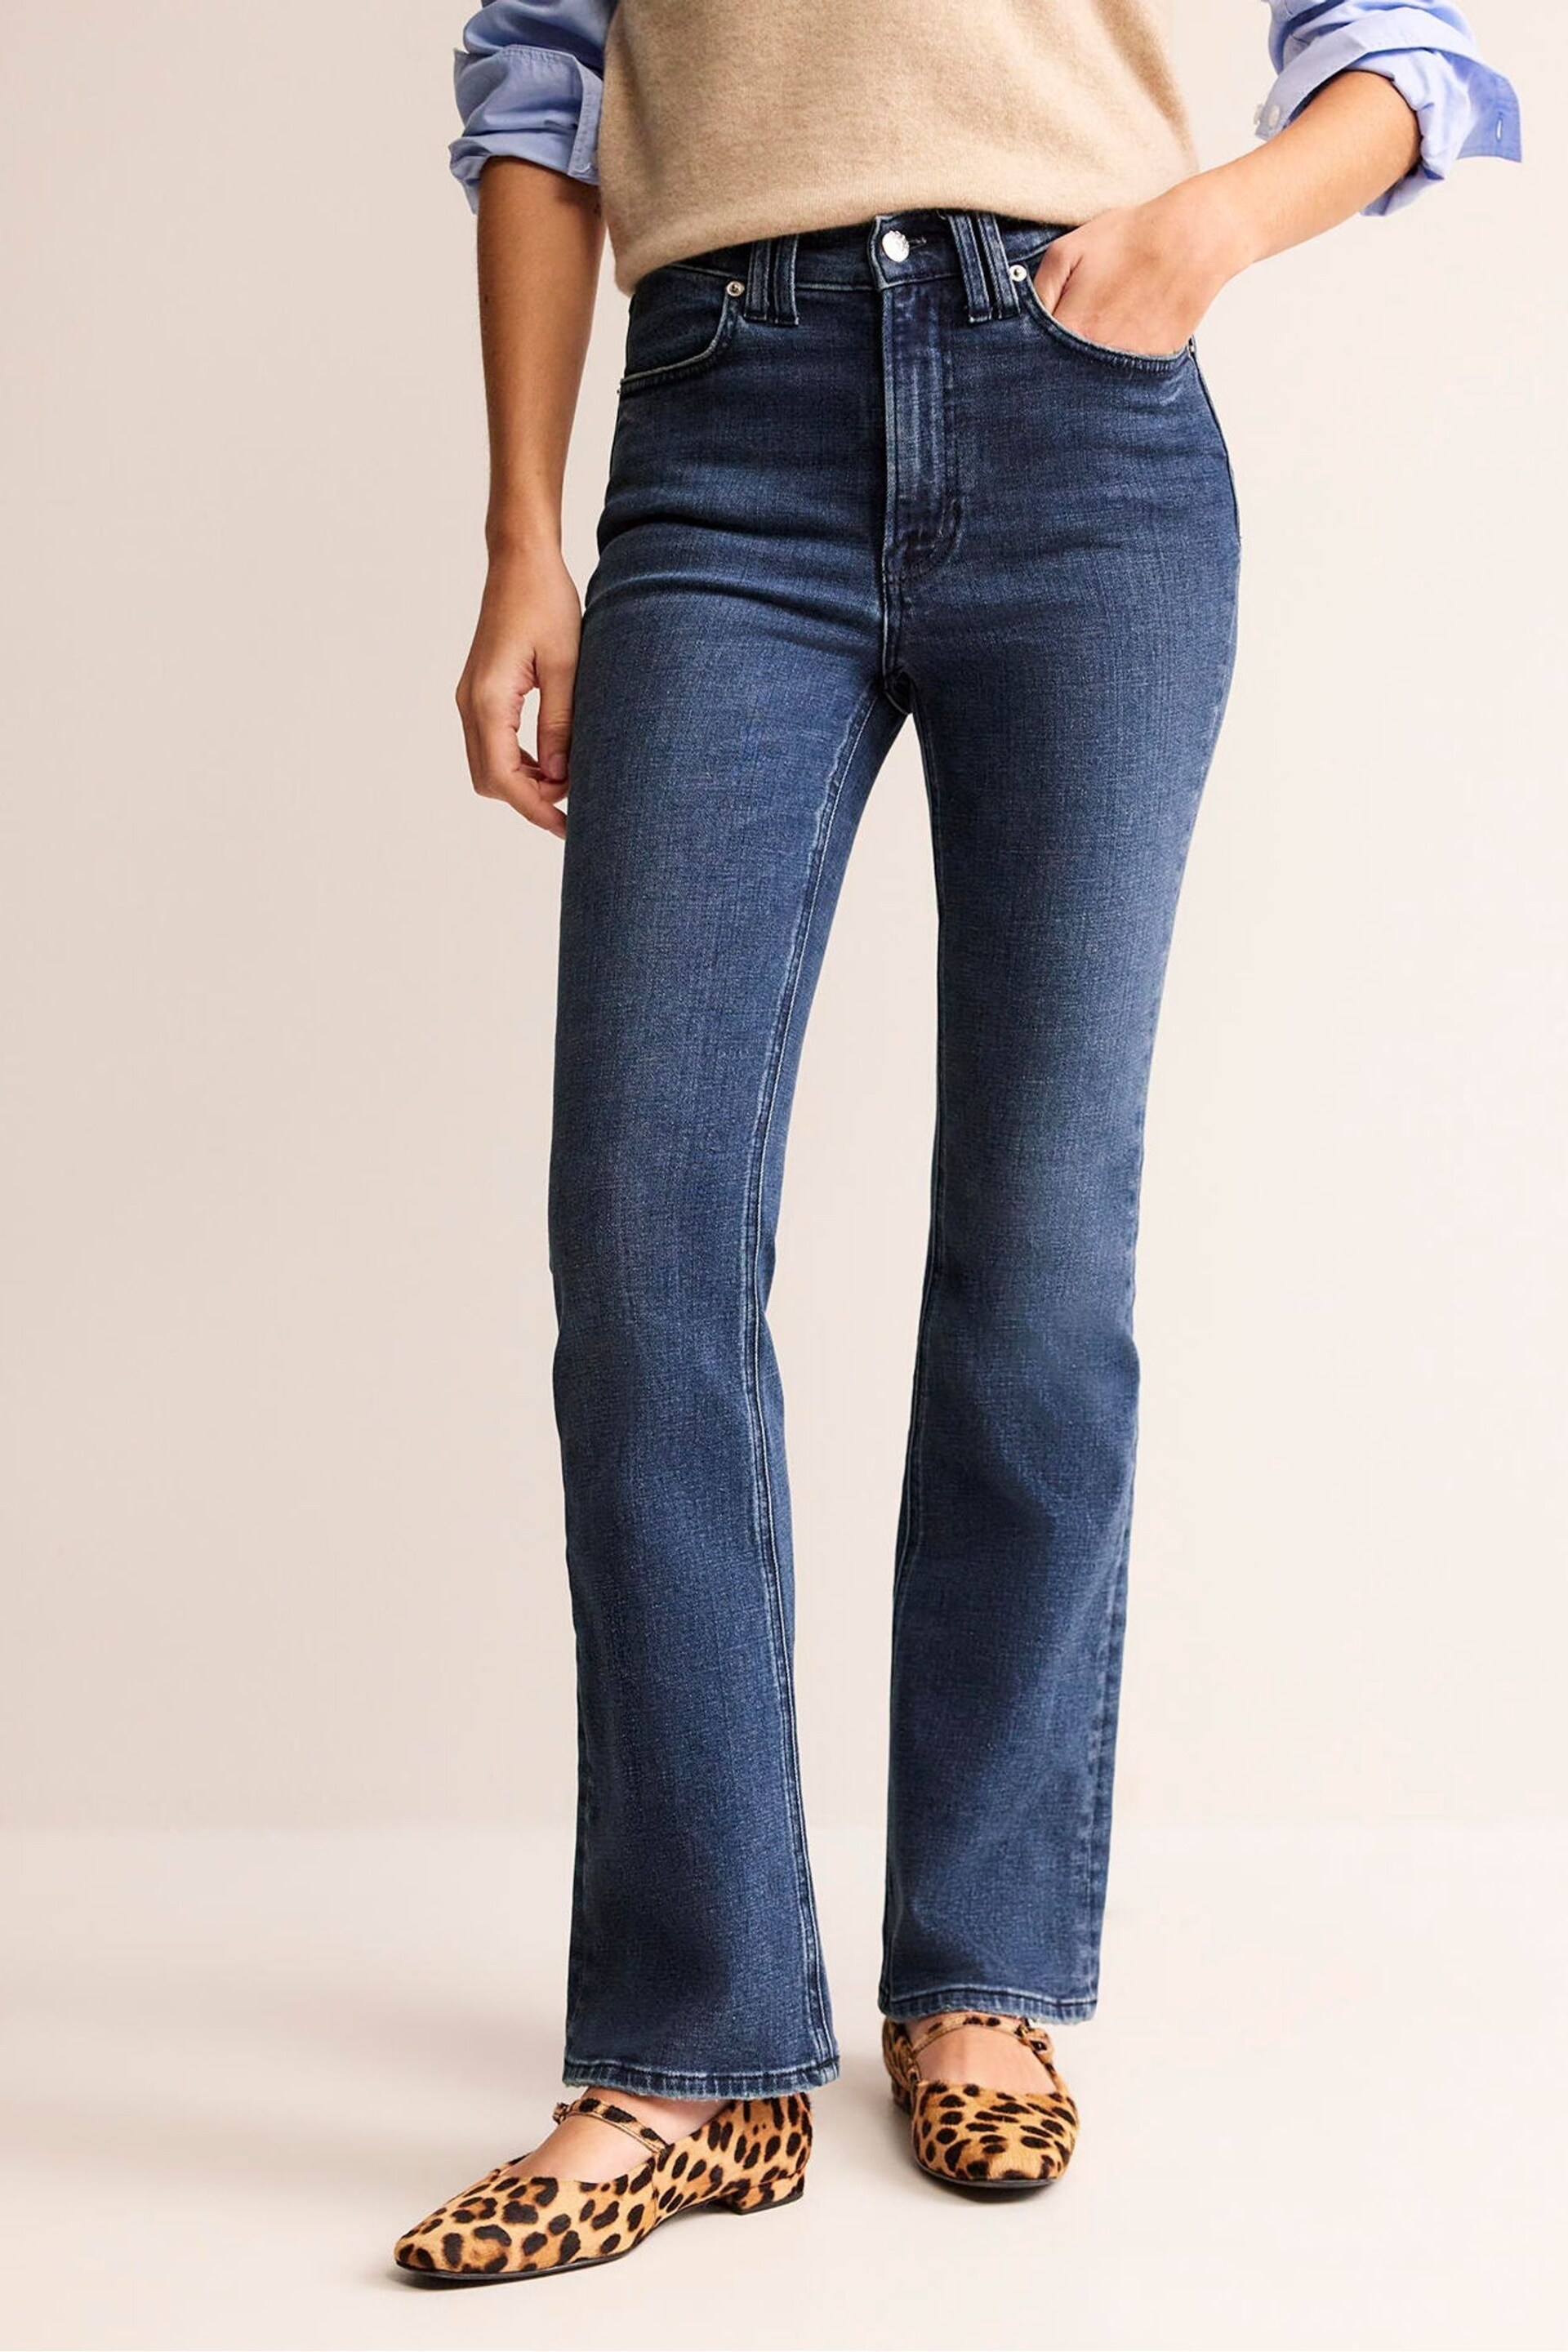 Boden Blue Mid Rise Slim Flare Jeans - Image 1 of 6